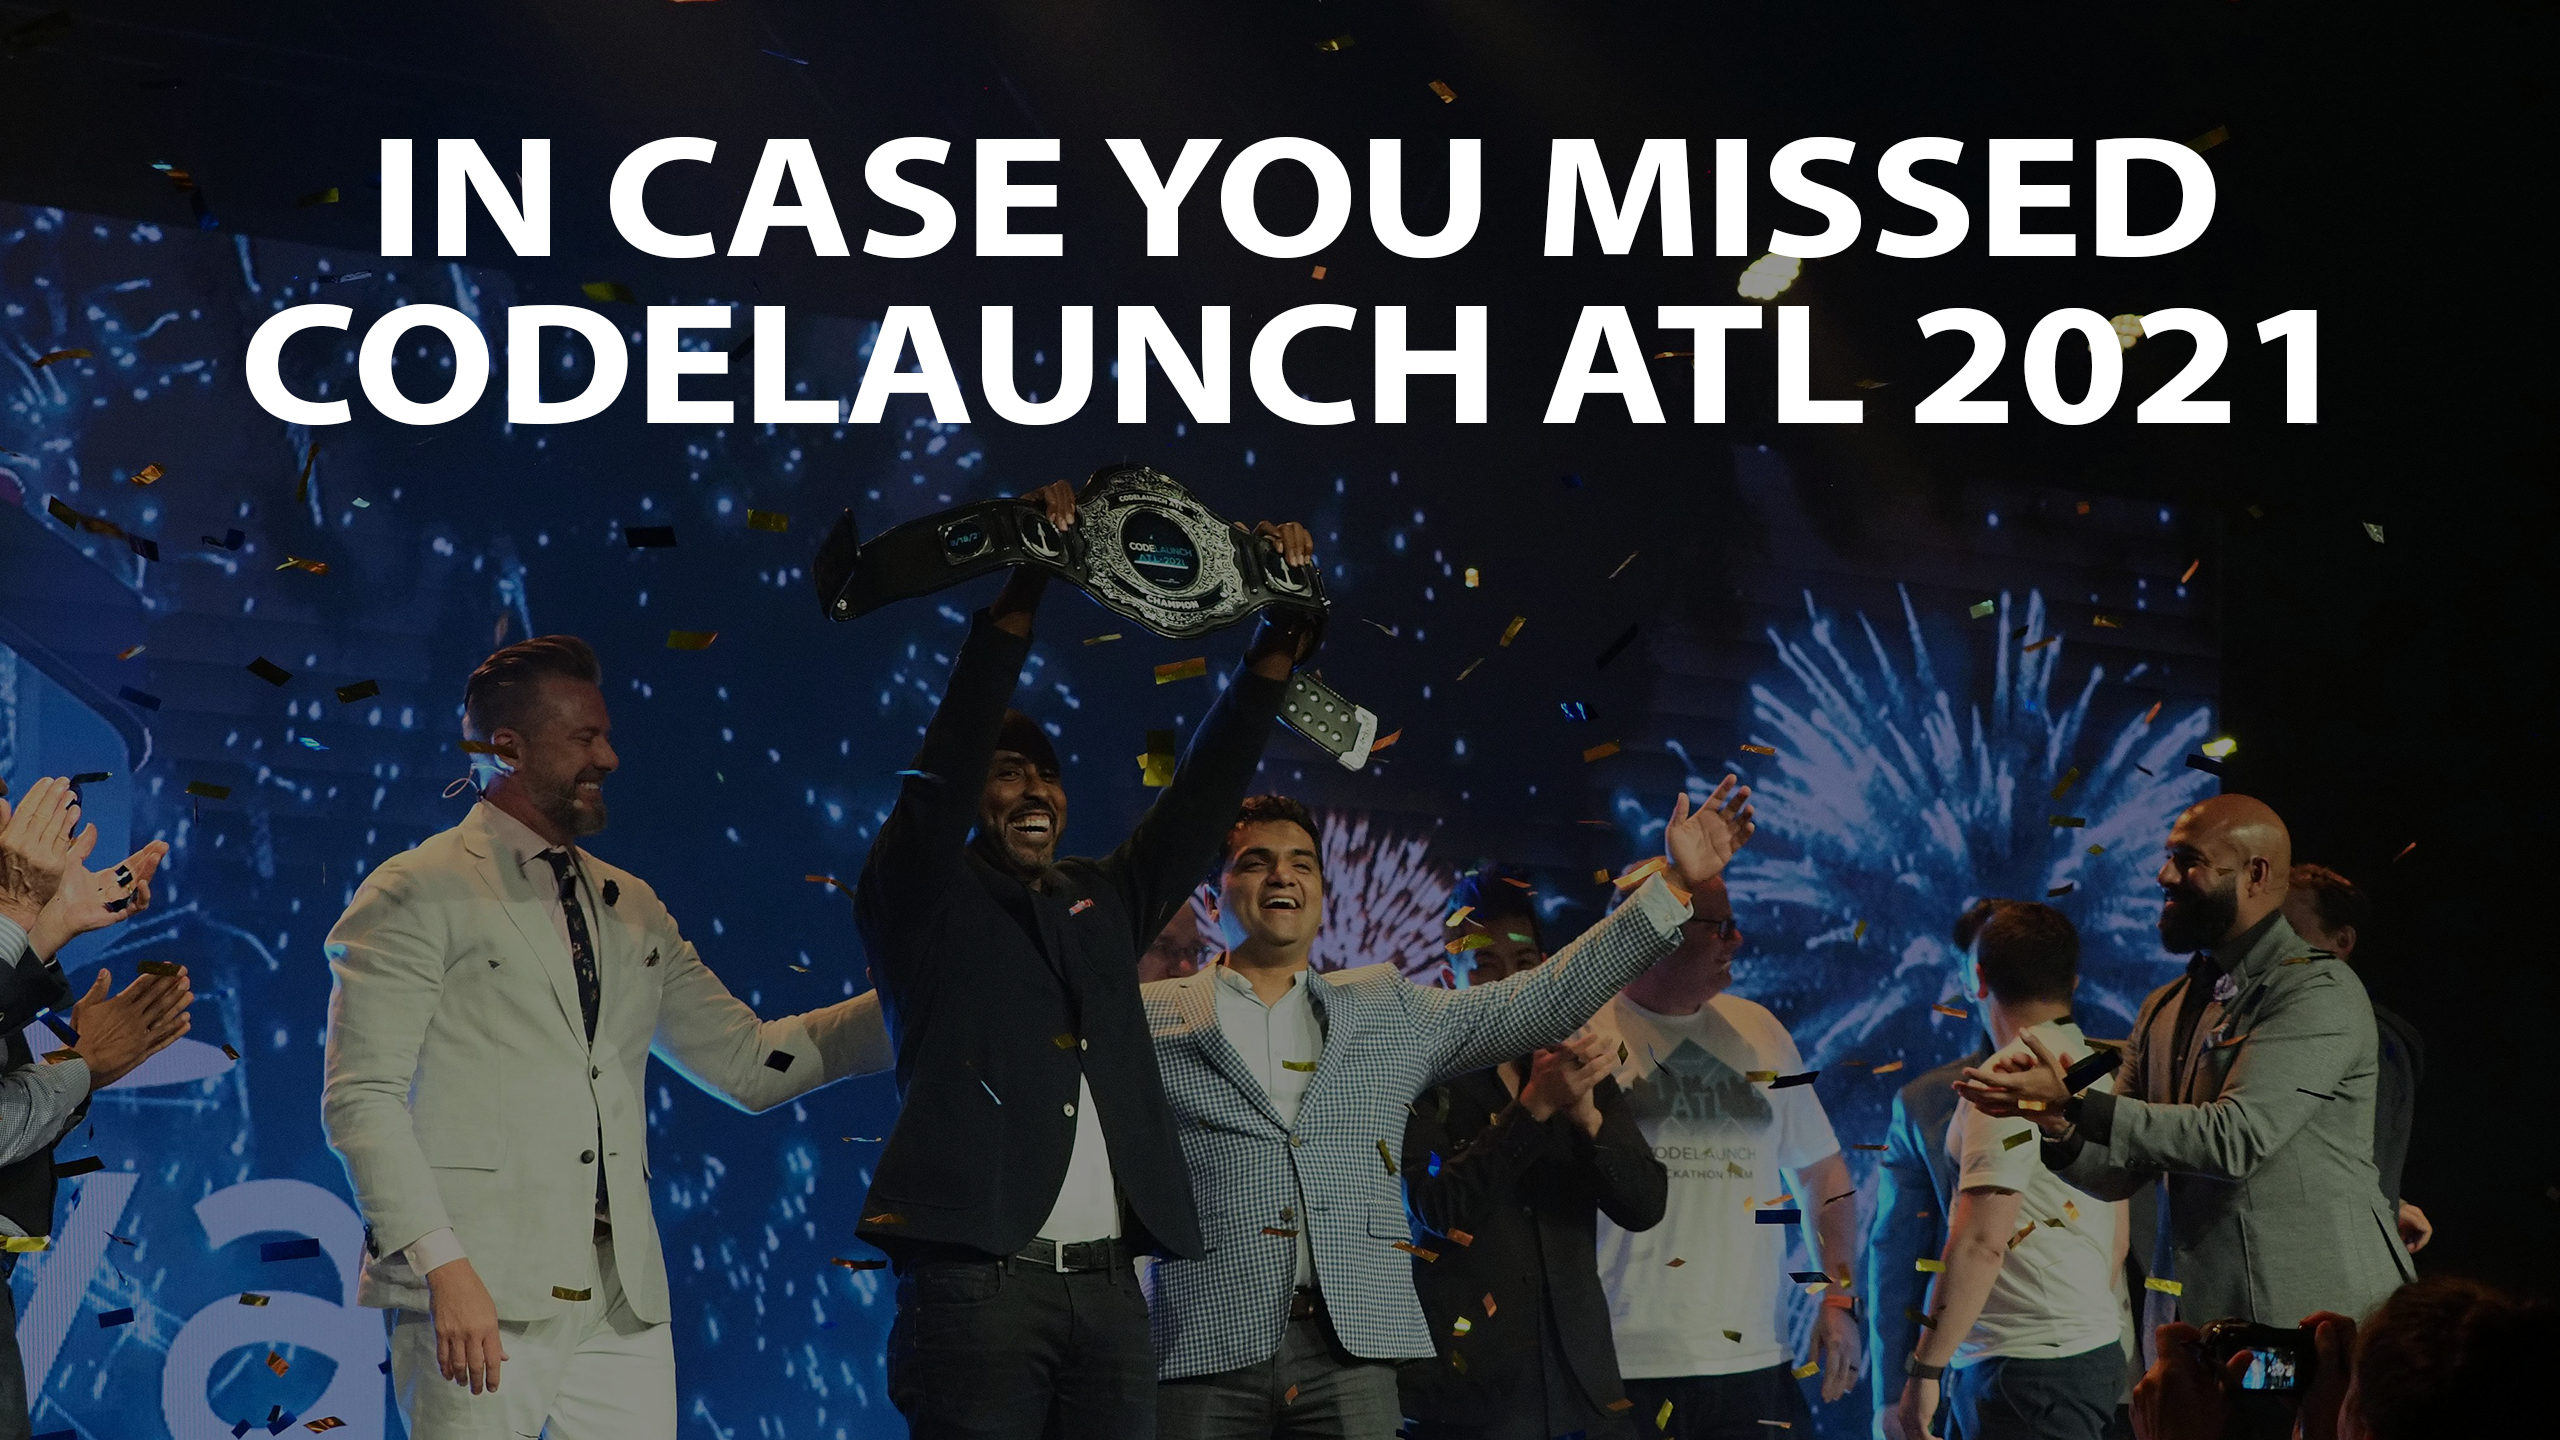 In Case You Missed CodeLaunch ATL 2021